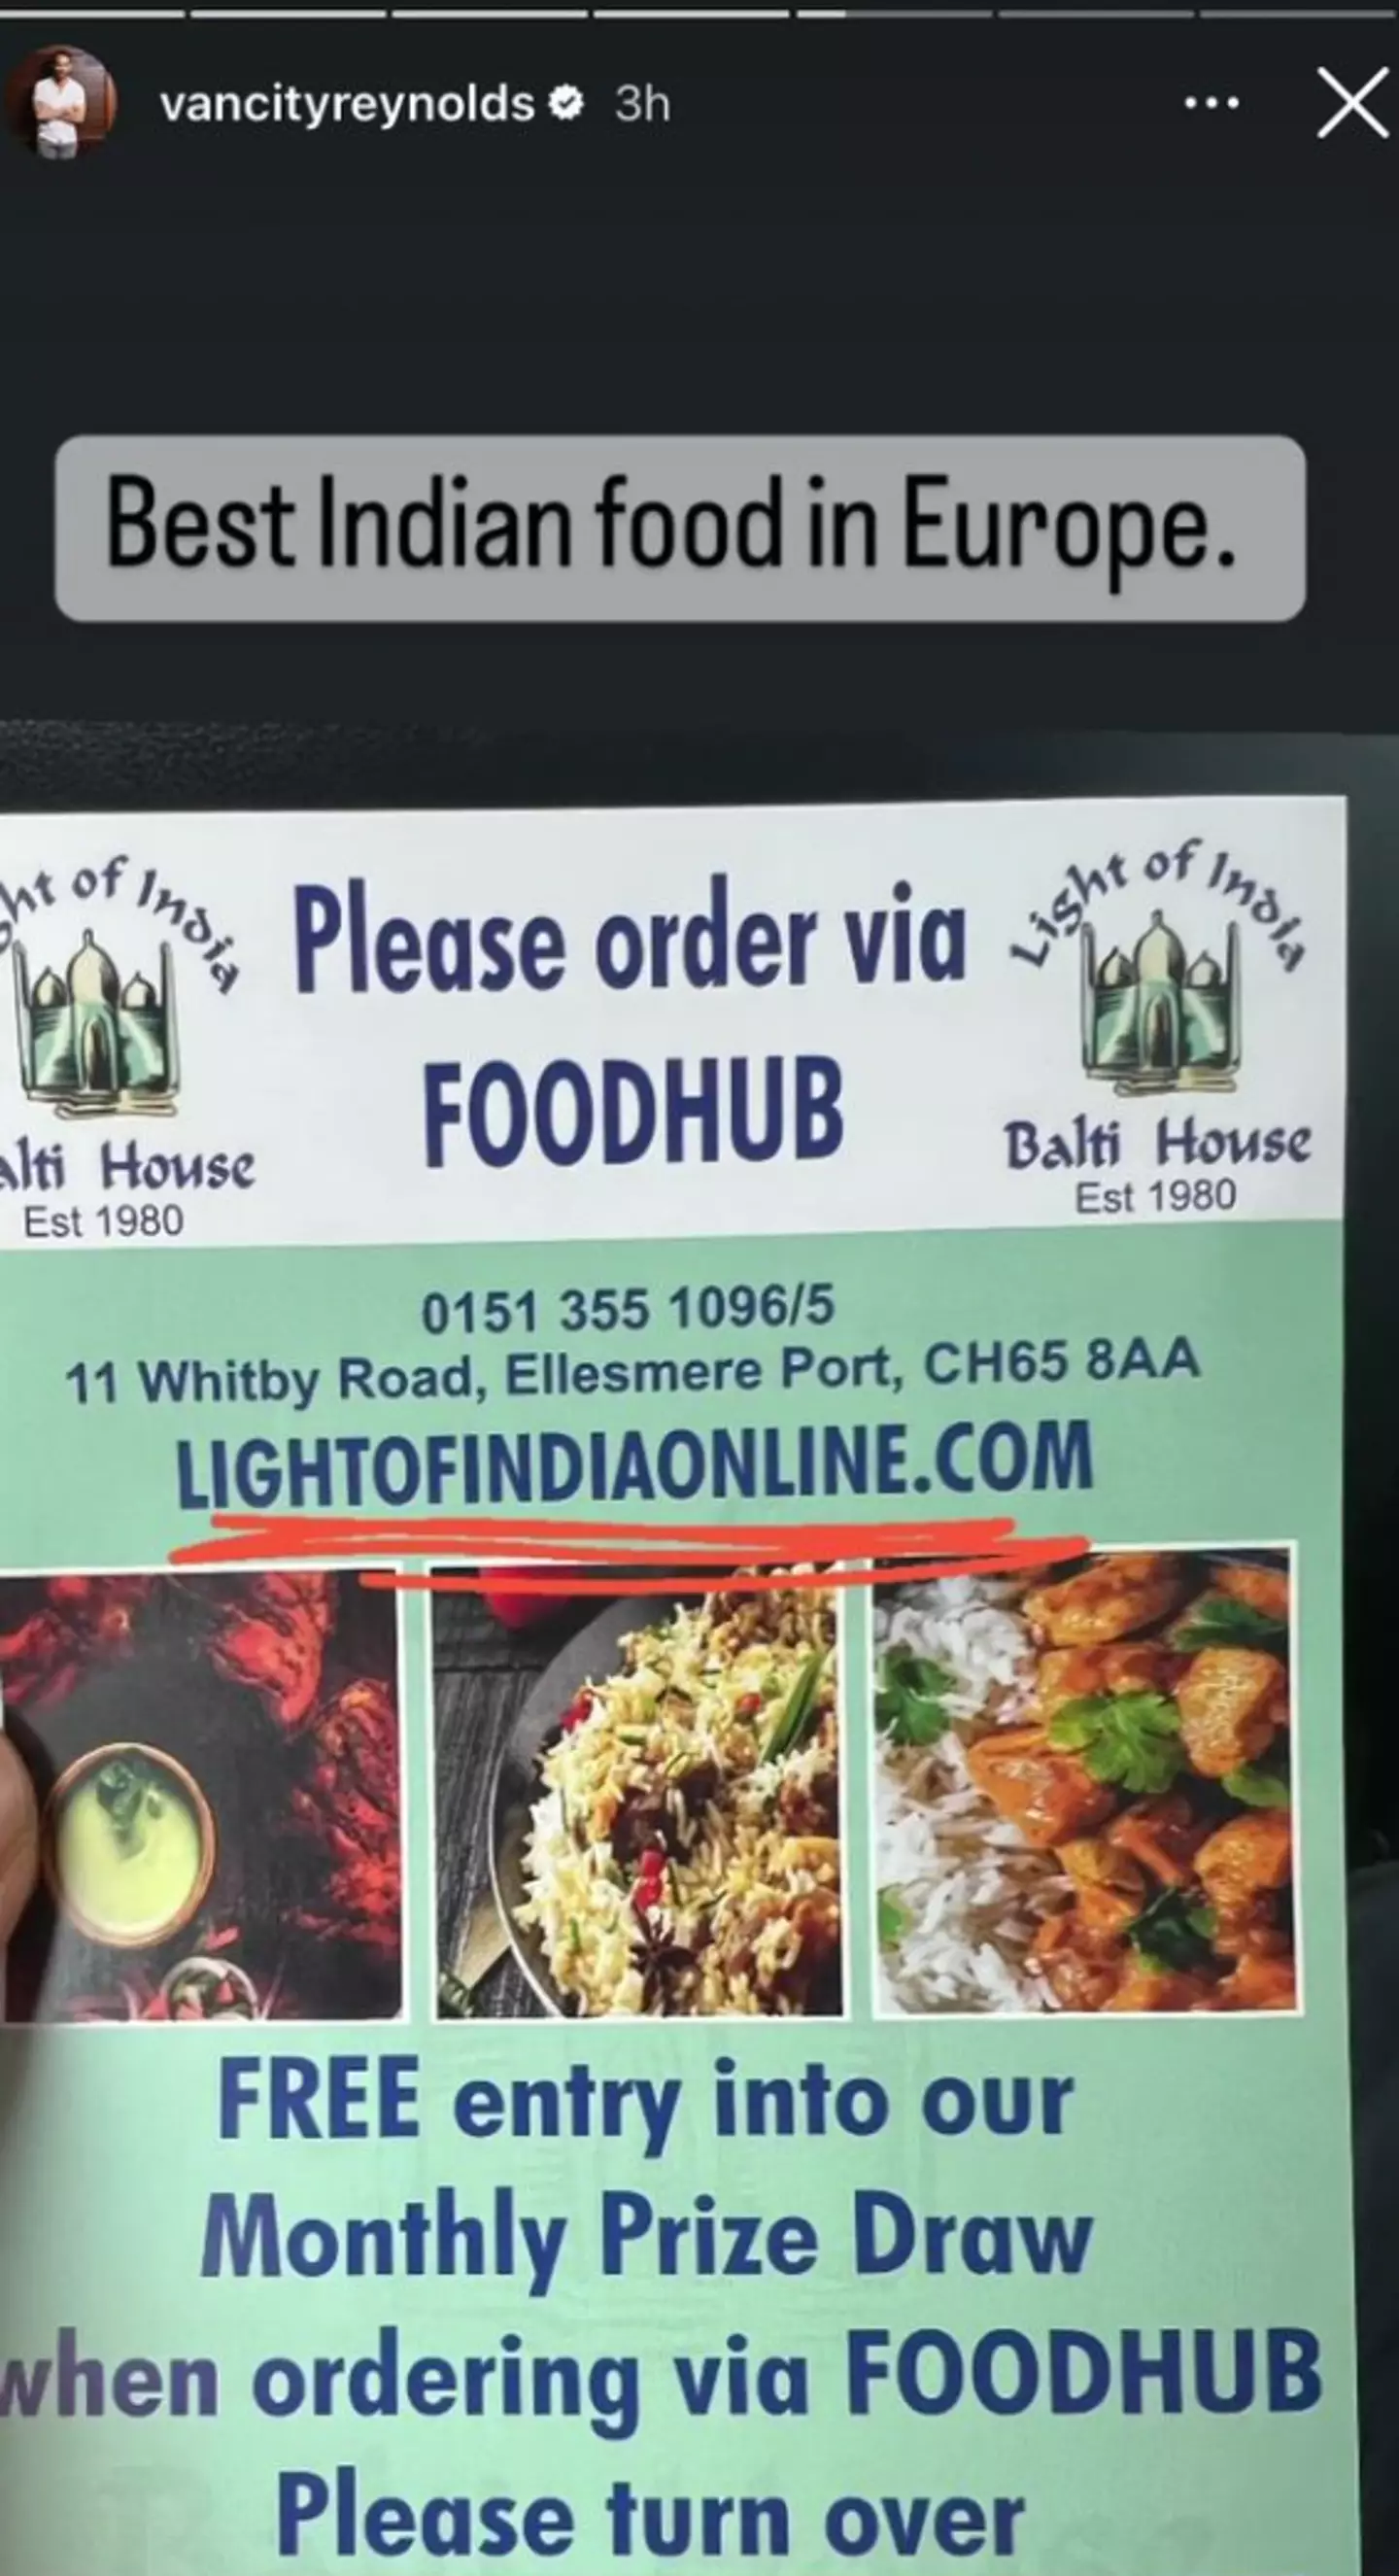 Reynolds shared a photo of the takeaway’s menu with his 44 million followers.